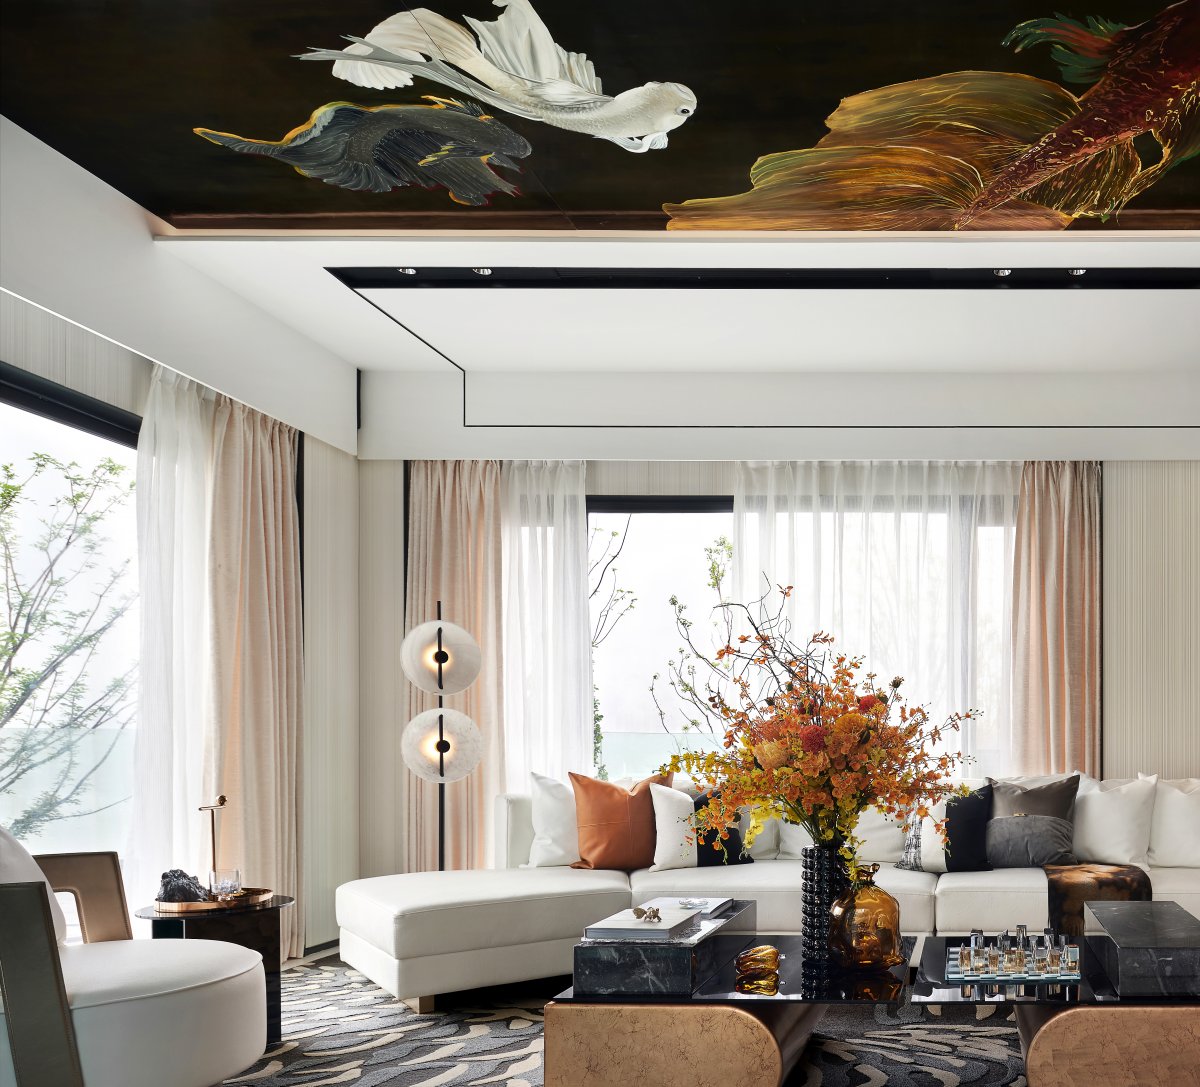 An electrifying moon story told by GBD studio in the luxury villa project - Living Room